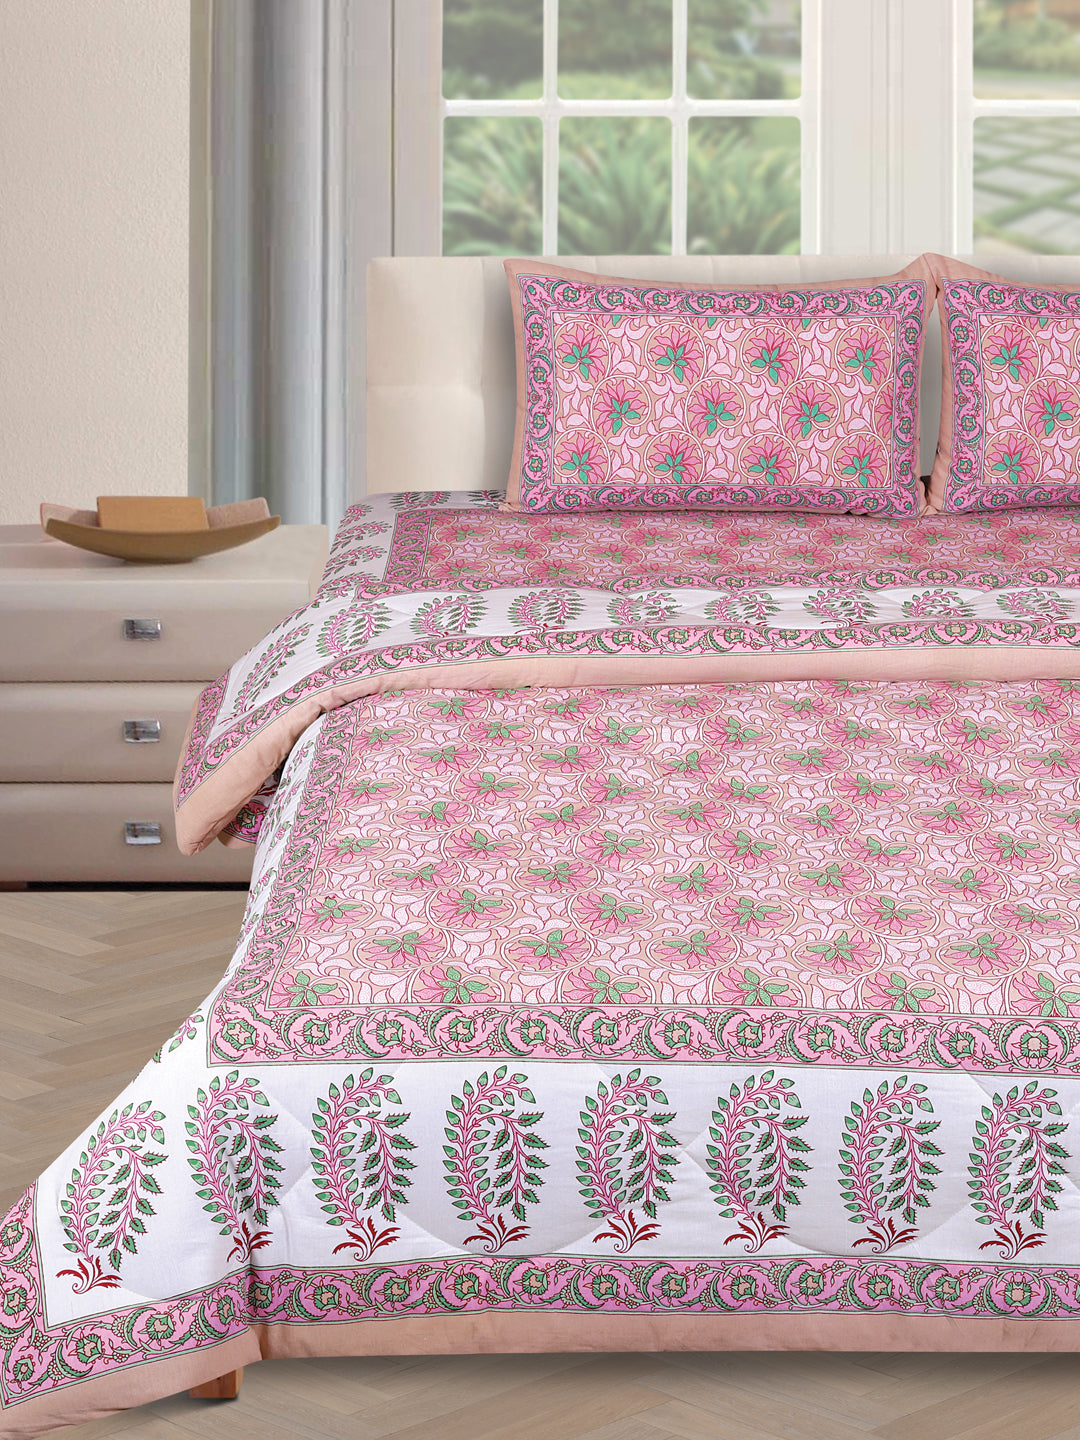 Jaipuri Bedding Set Reversible AC Comforter with Bedsheet and 2 Pillow Covers, Pink